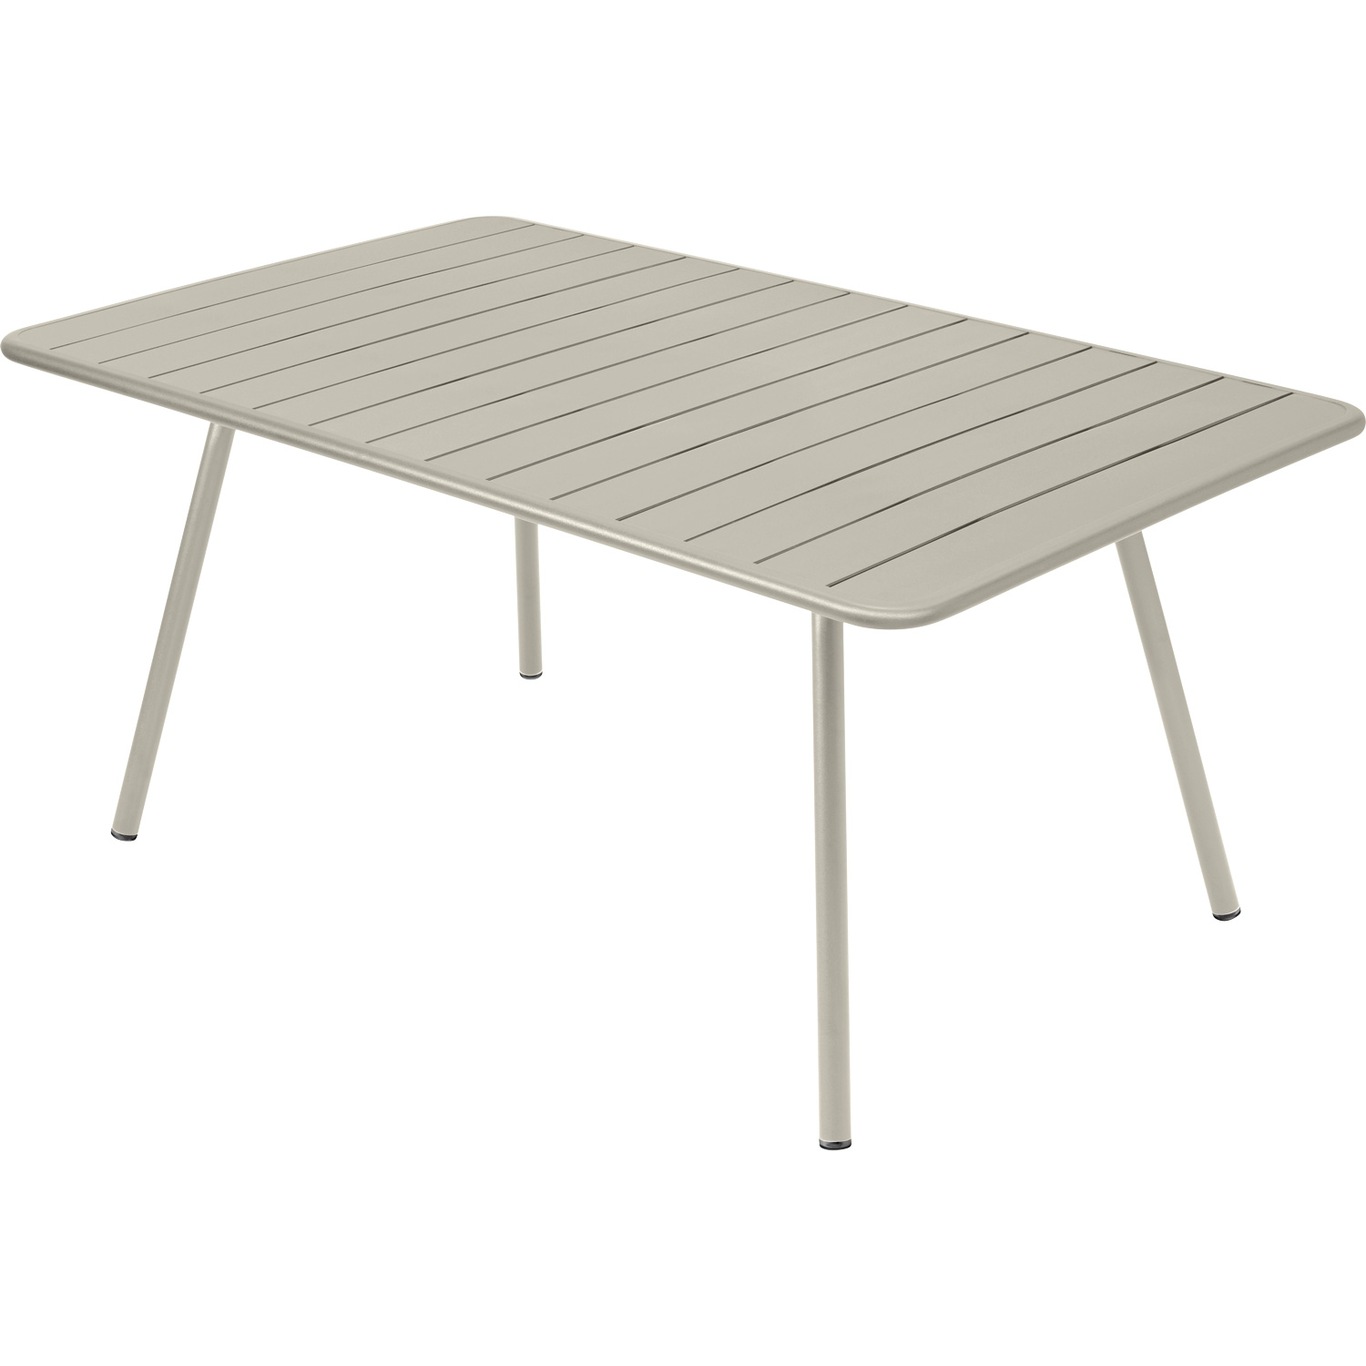 Luxembourg Table 165X100, Clay Grey